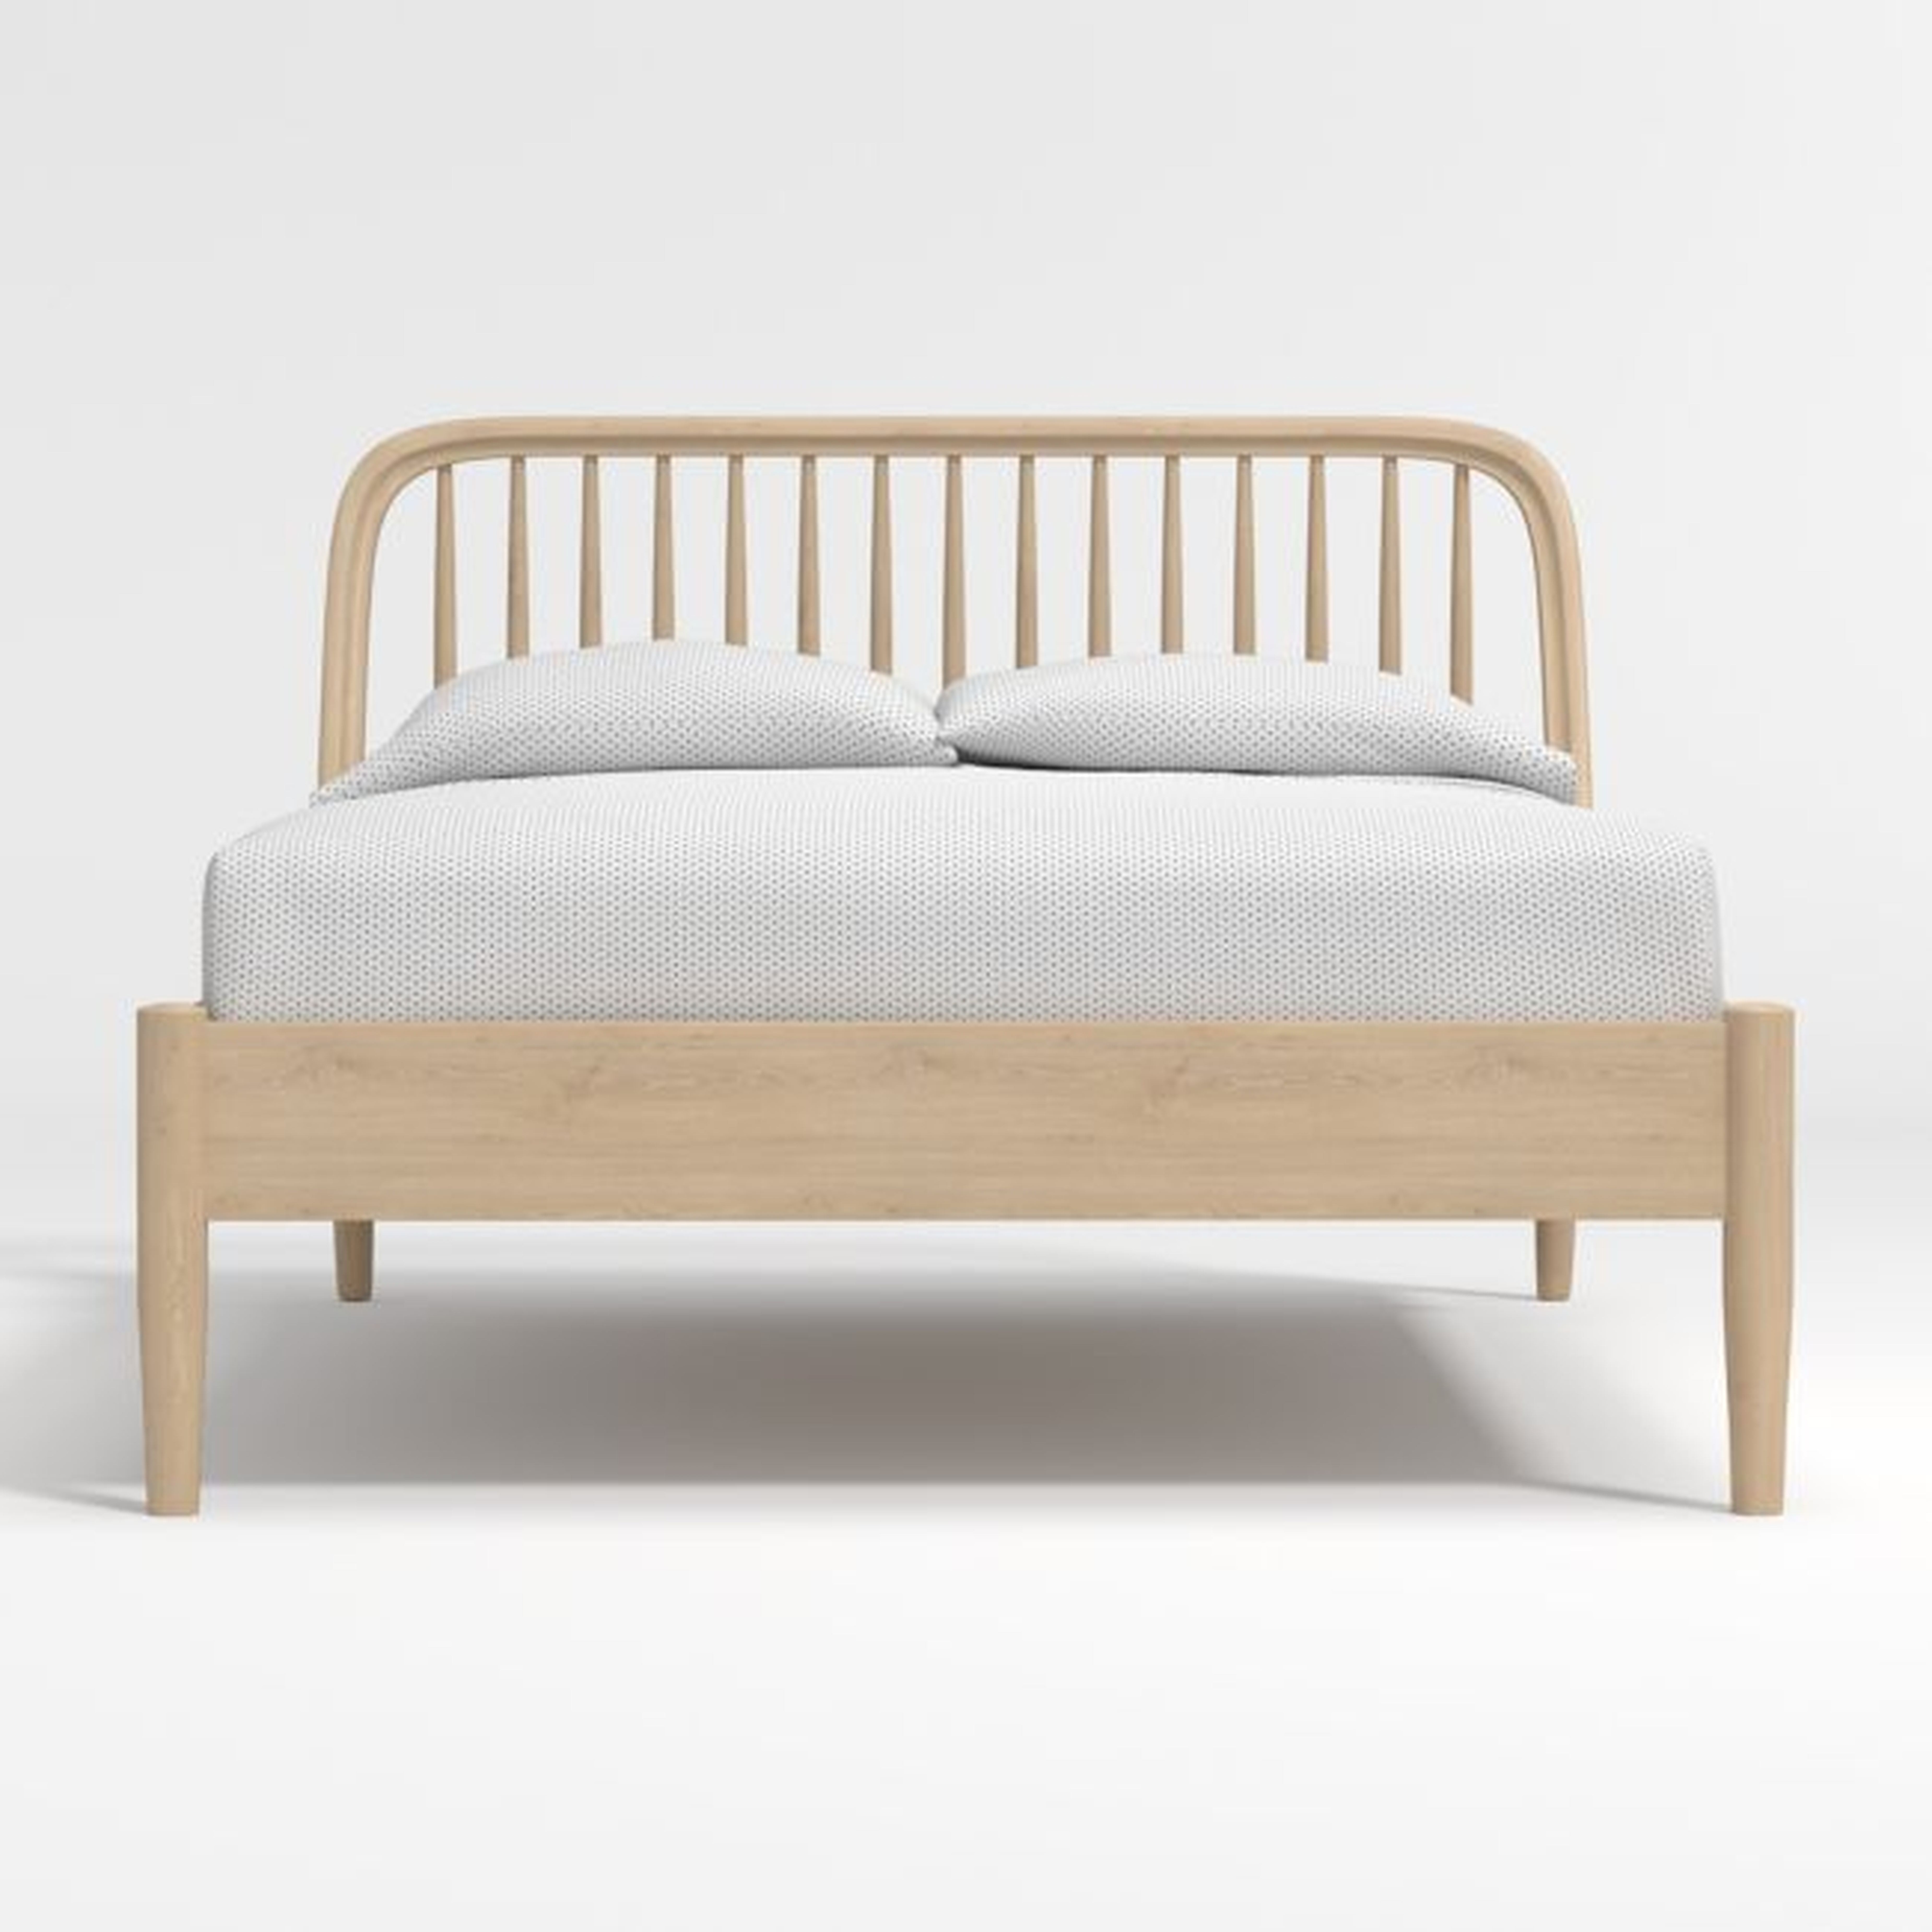 Bodie Oak Spindle Full Bed - Crate and Barrel